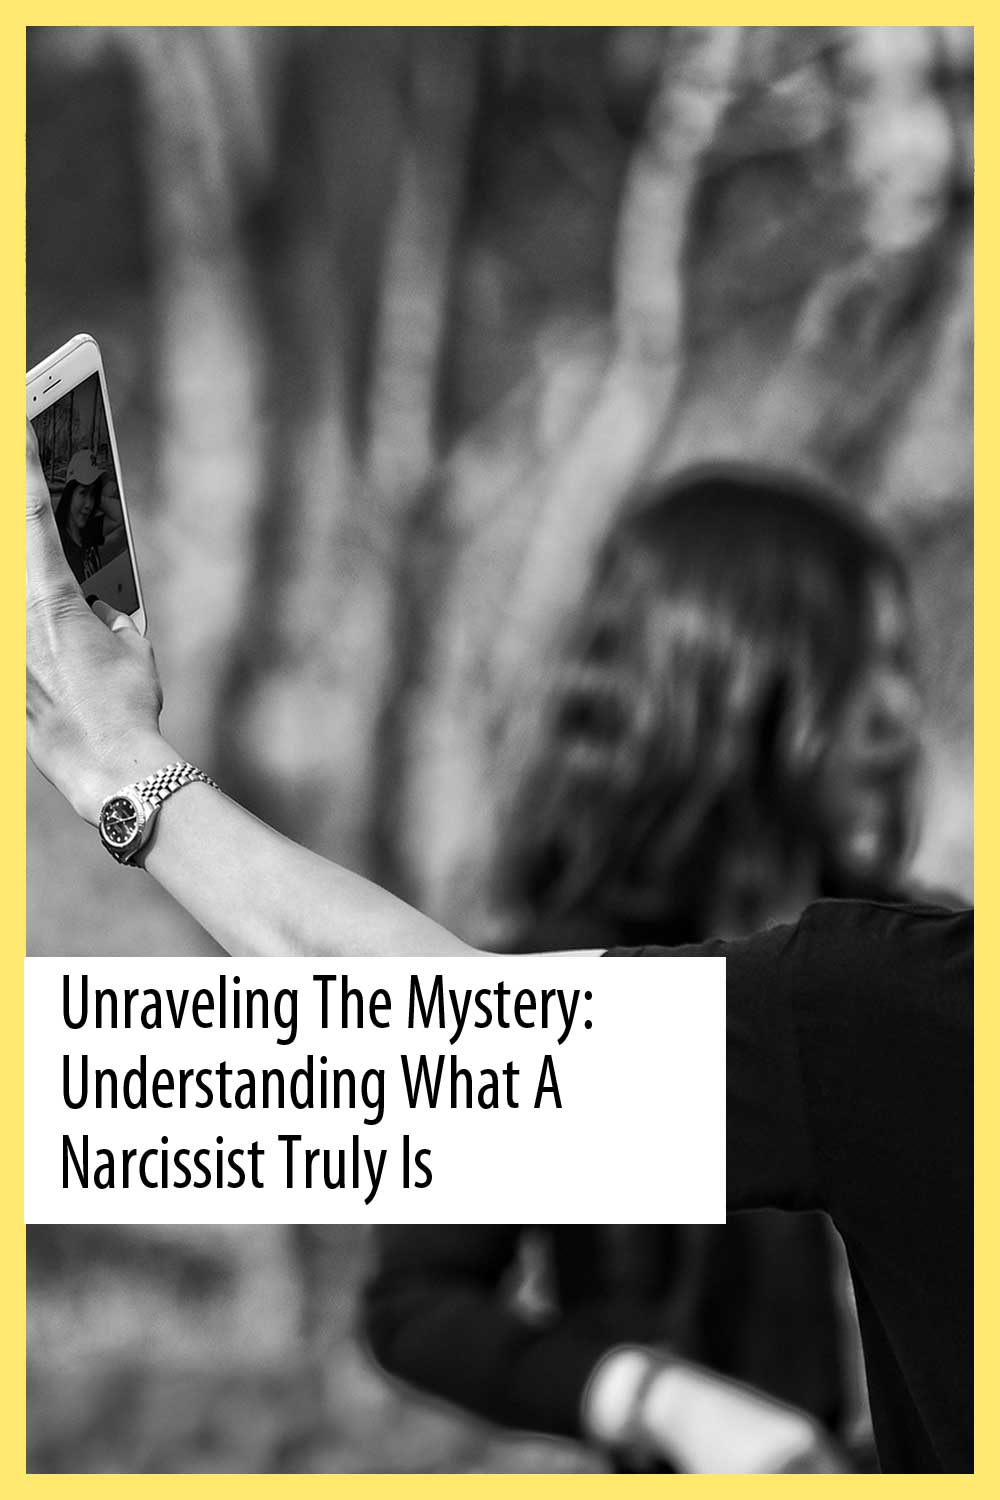 Unraveling the Mystery: Understanding What a Narcissist Truly Is